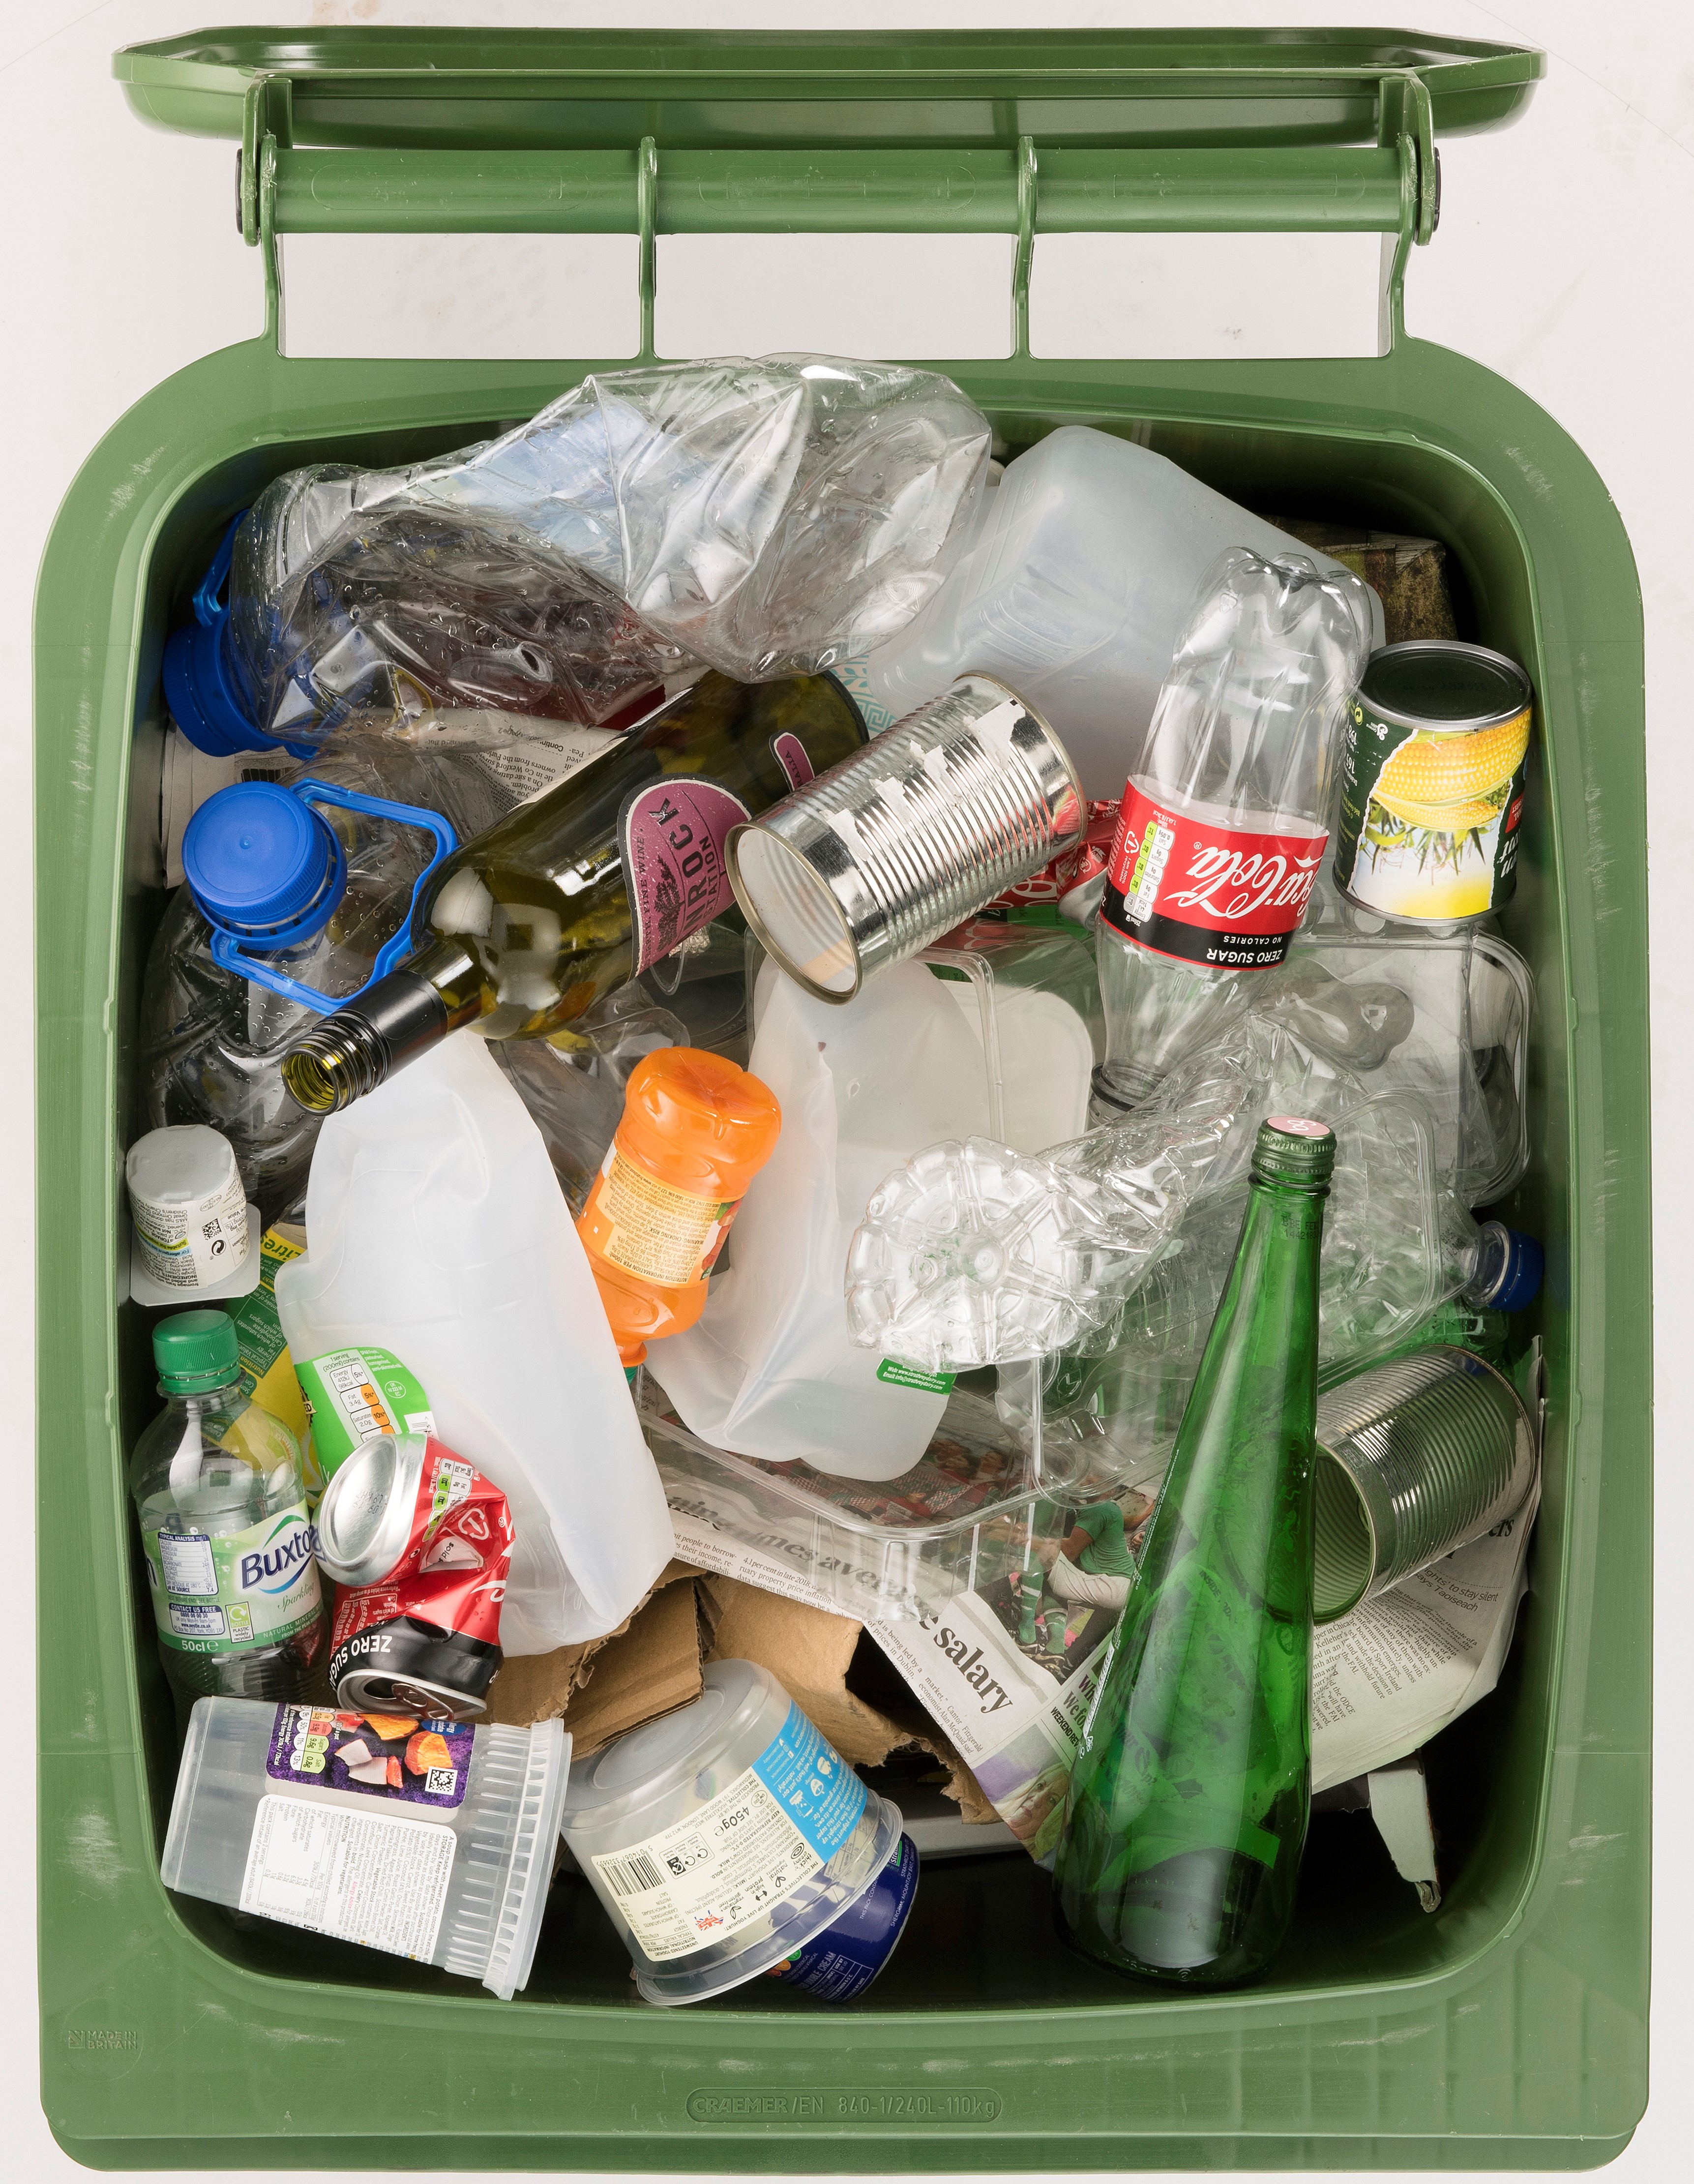 Survey reveals 17% of LCCC residents put glass directly into their general waste bin